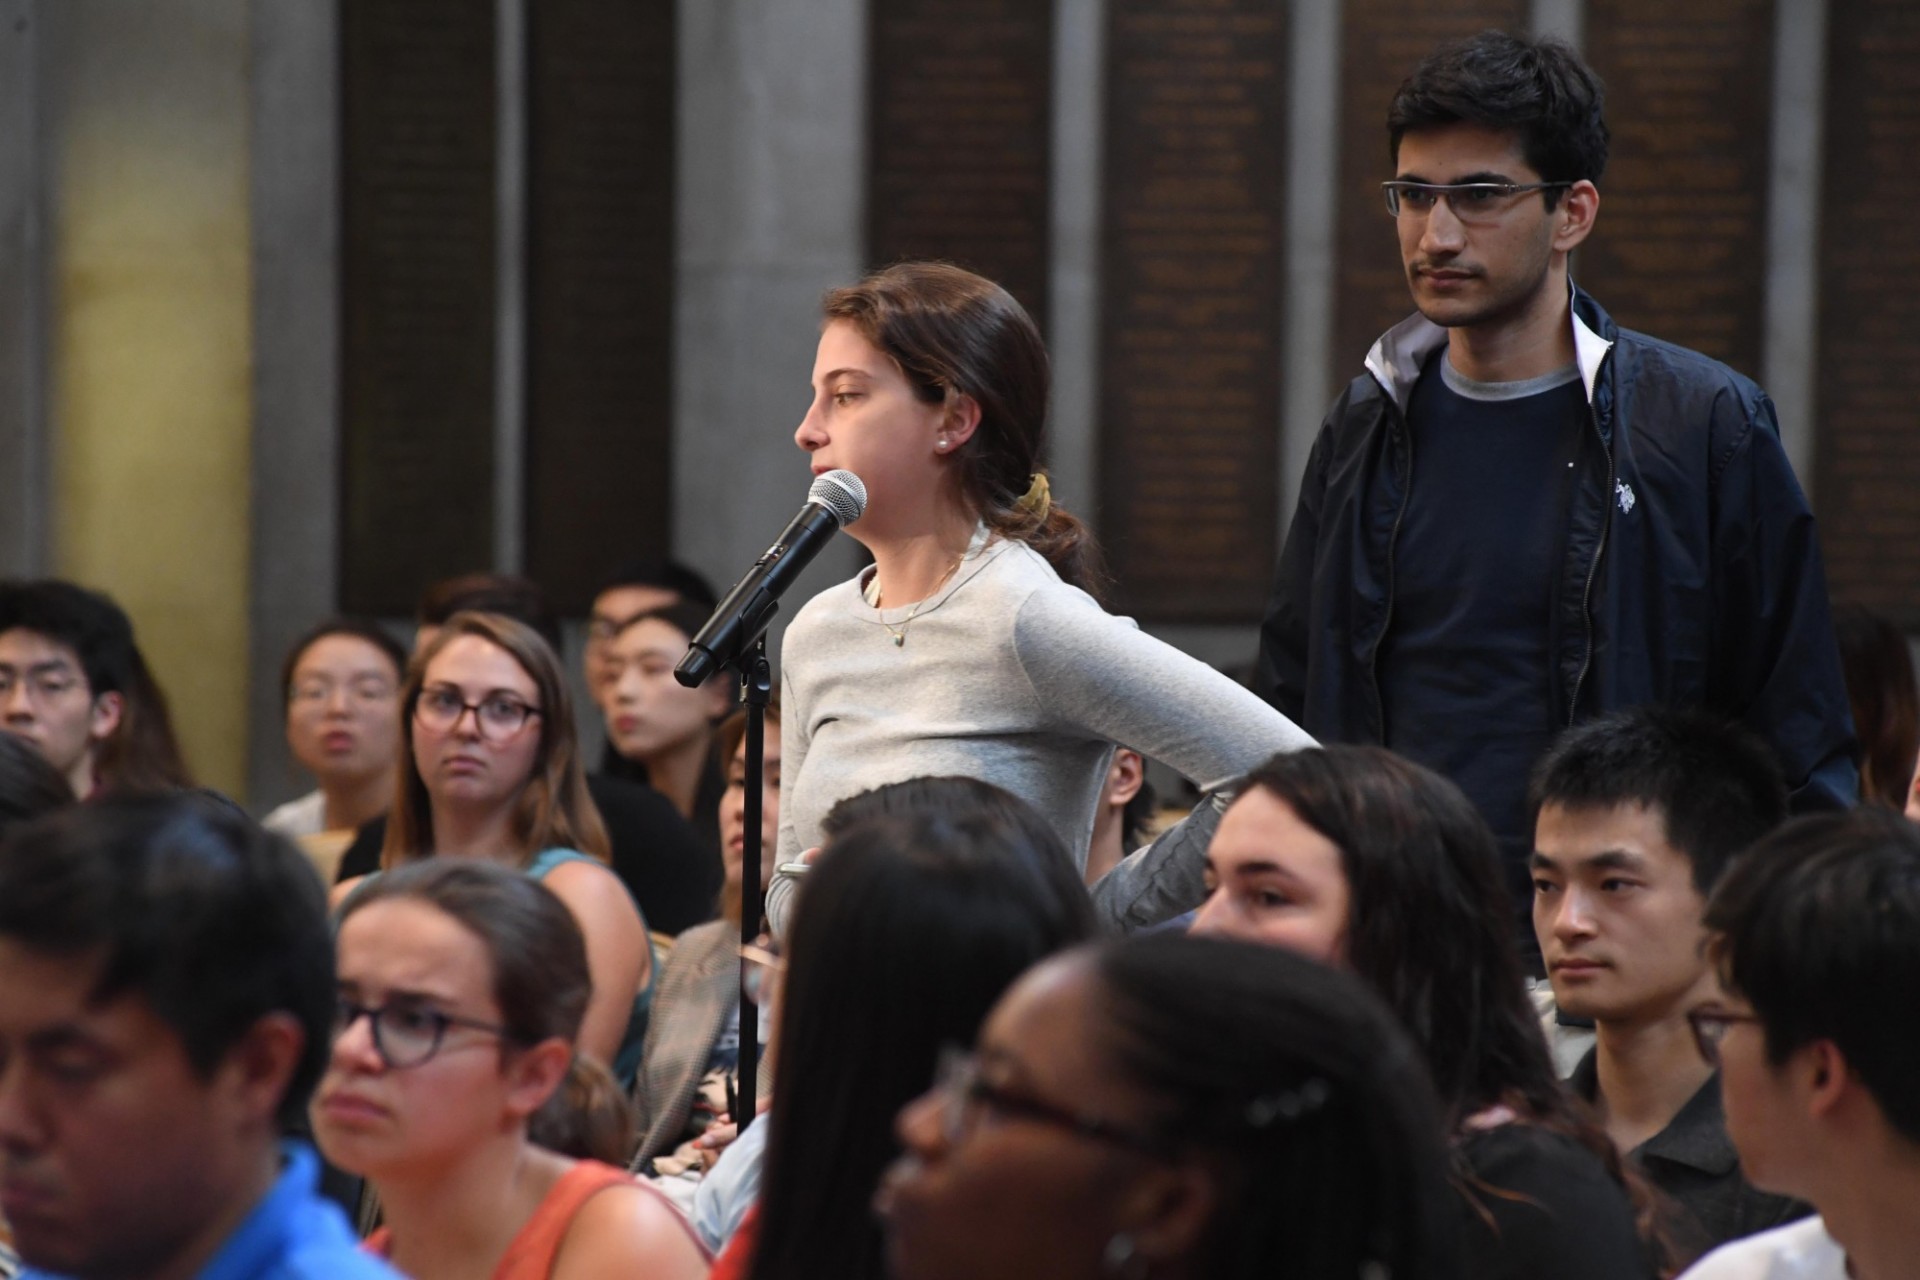 Columbia University students line up to ask Jayathma Wickramanayake, UN Secretary-General's Envoy on Youth questions during the question and answer session.